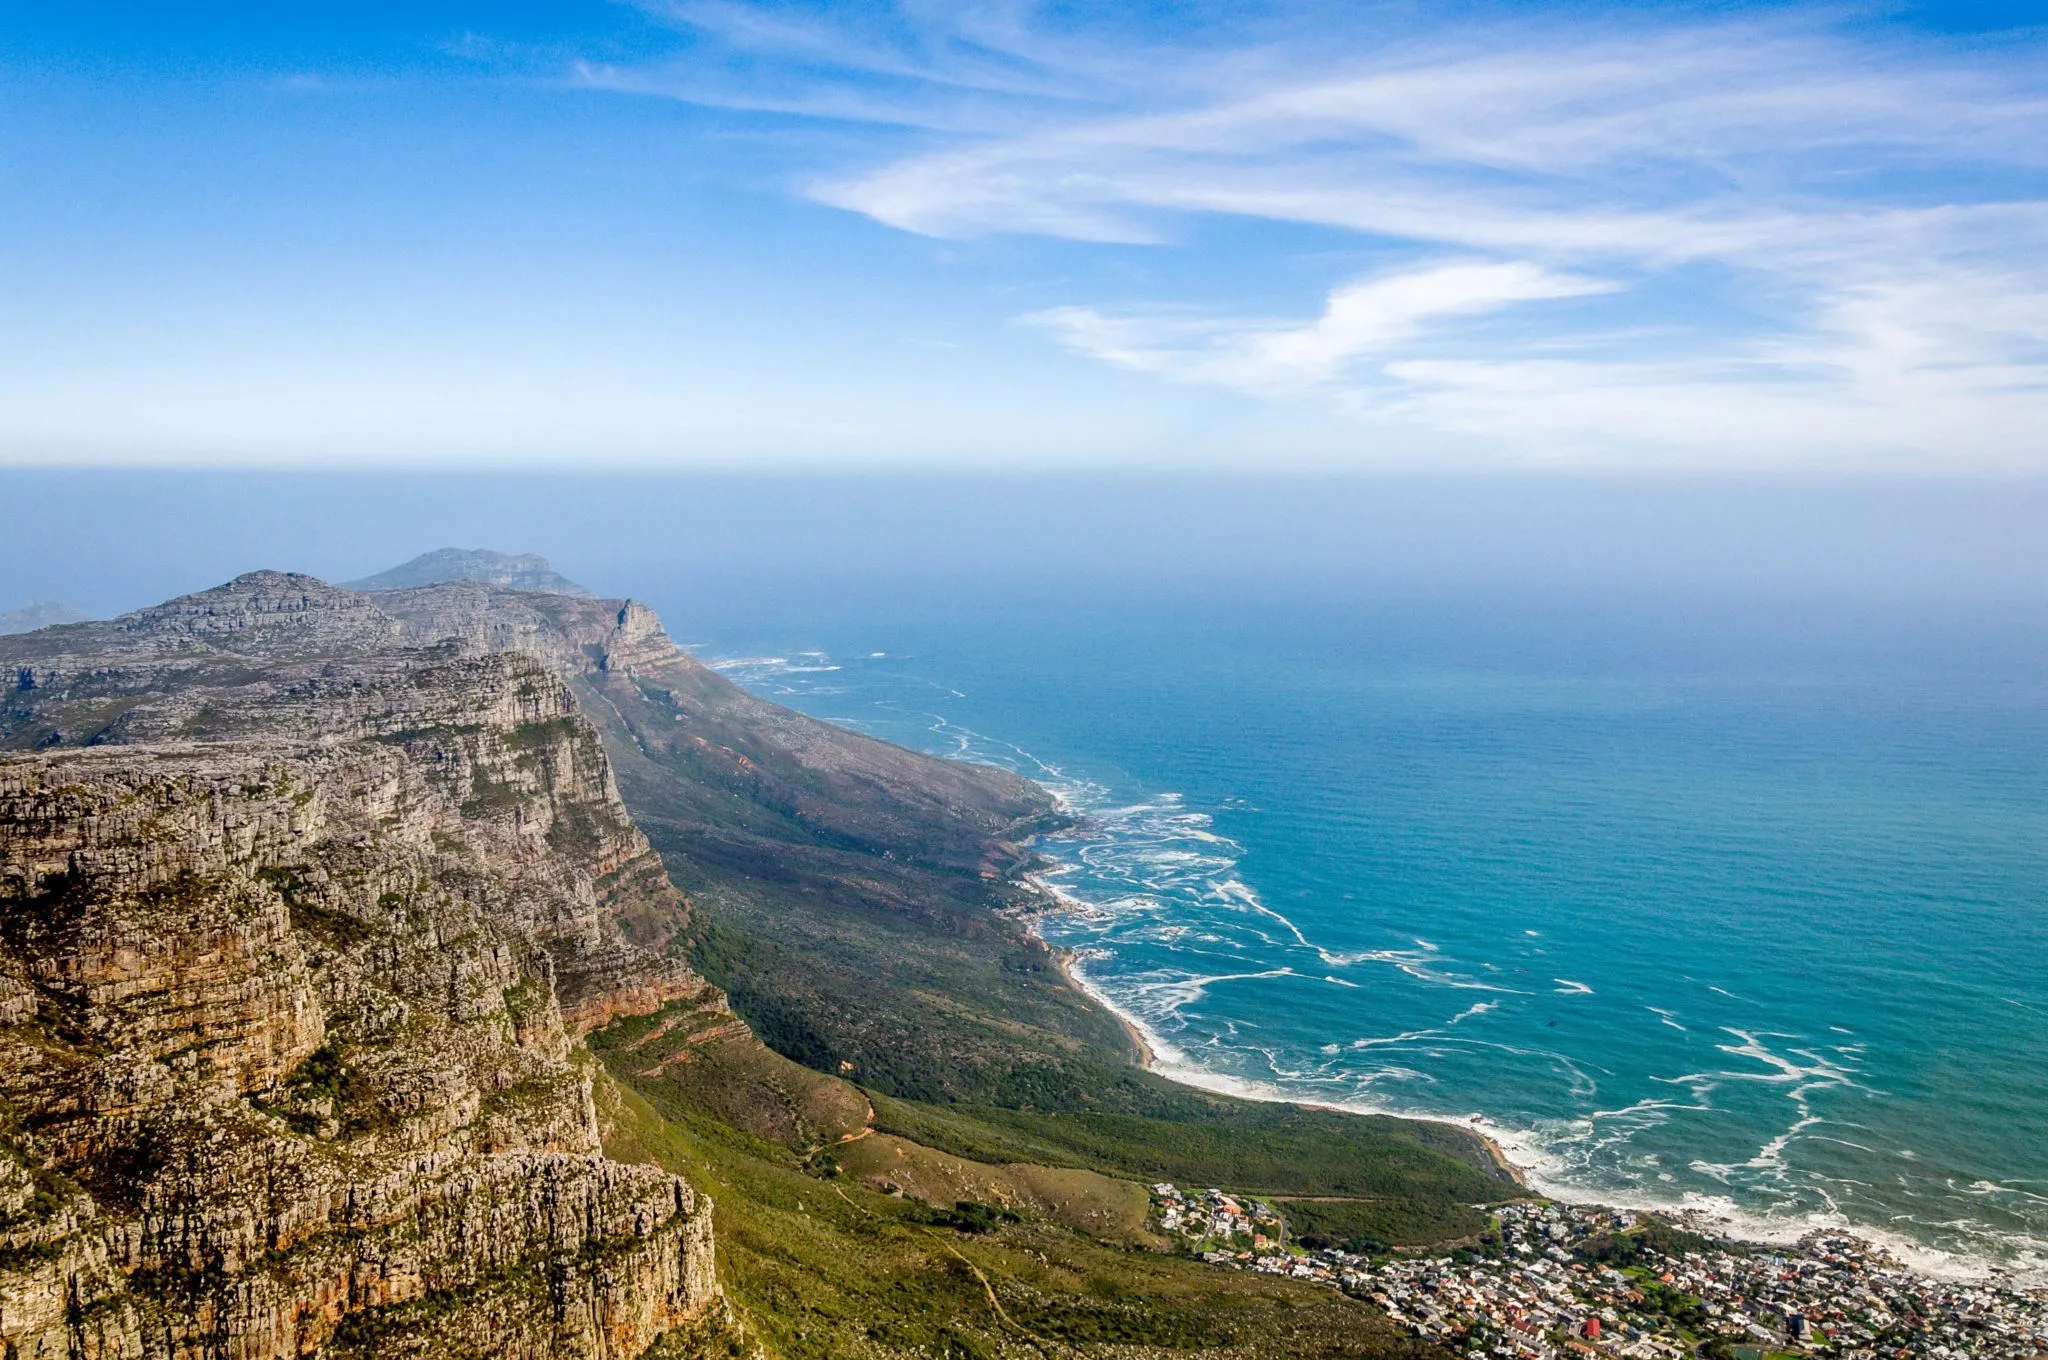 The view from South Africa's Table Mountain is spectacular. Take a look at this 14-day itinerary for South Africa and Victoria Falls.